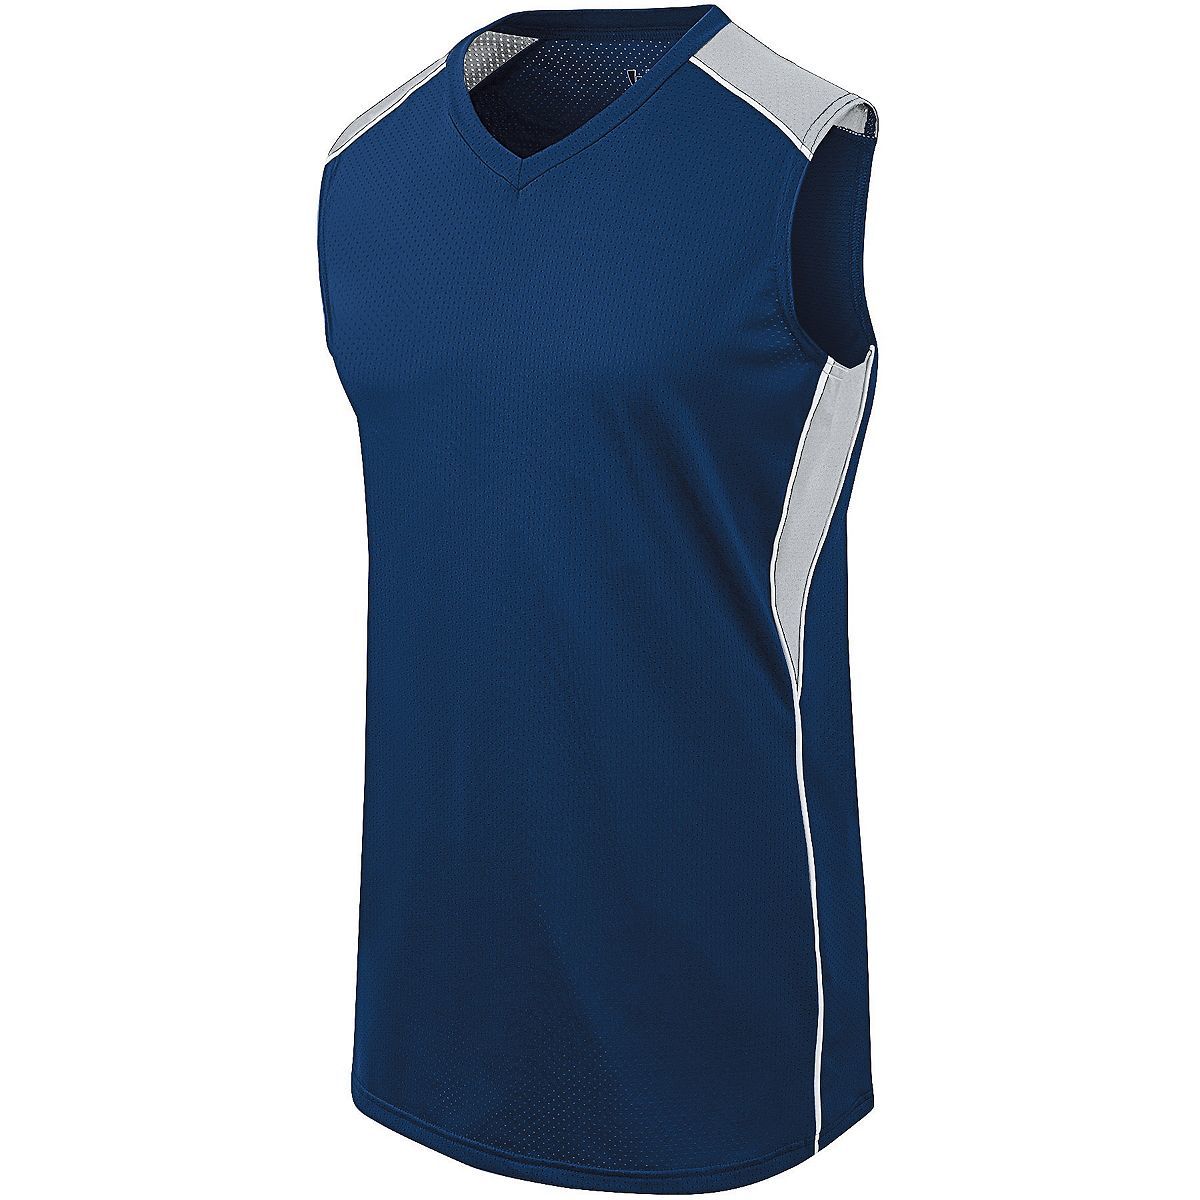 Augusta Sportswear Ladies Dynamite Jersey in Navy/Silver Grey/White  -Part of the Ladies, Ladies-Jersey, Augusta-Products, Softball, Shirts product lines at KanaleyCreations.com